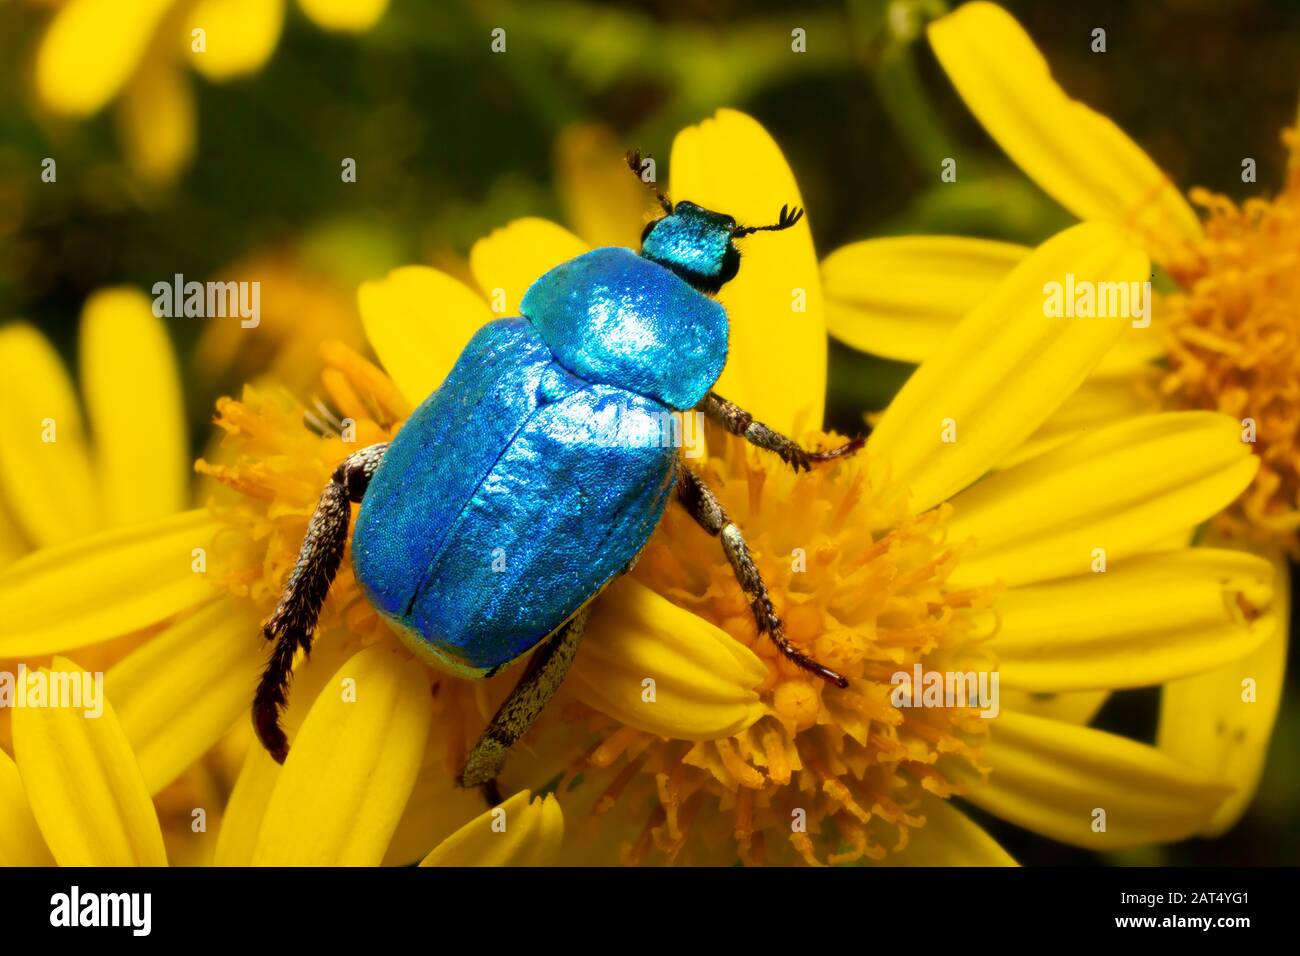 The iridescent blue of the scarab beetle (hoplia coerulea) shimmers in contrast to the yellow of the ragwort flowers it is walking over. Stock Photo